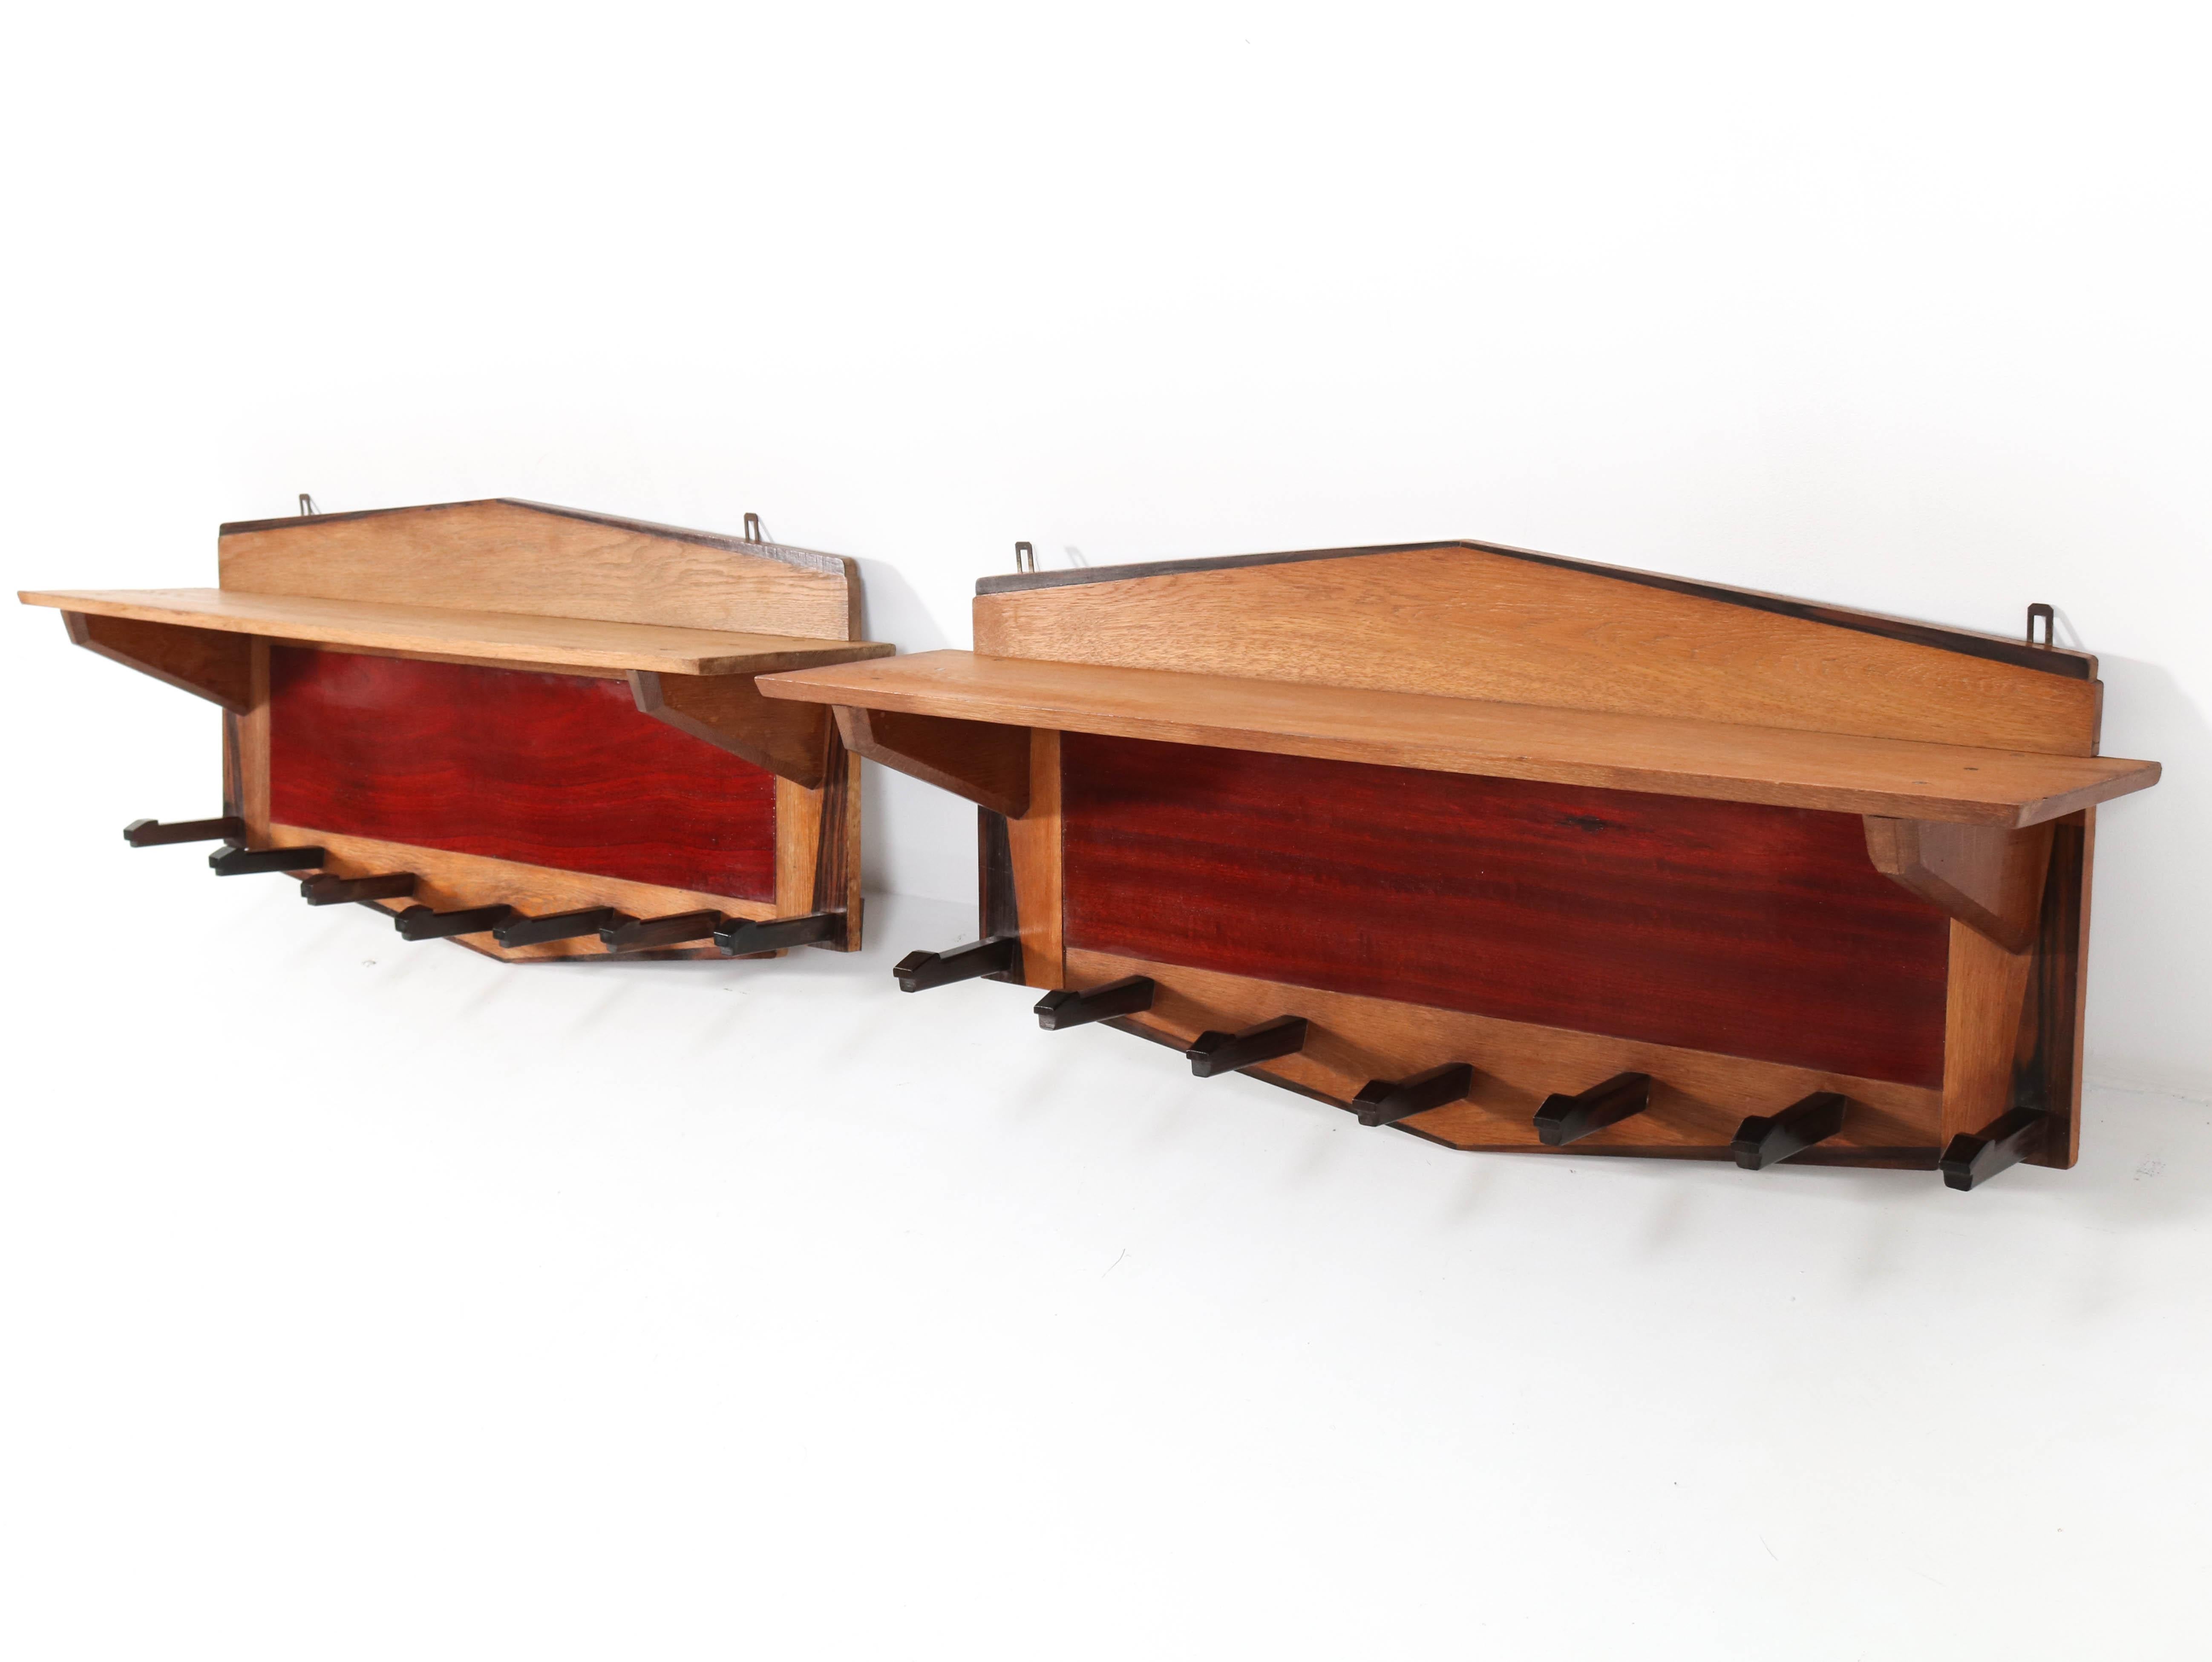 Wonderful and rare pair of two Art Deco Amsterdamse School coat racks.
Design by P.E.L. Izeren for Genneper Molen.
Striking Dutch design from the 1920s.
Solid oak with padouk and solid macassar hooks.
Marked with manufacturers paper label.
In